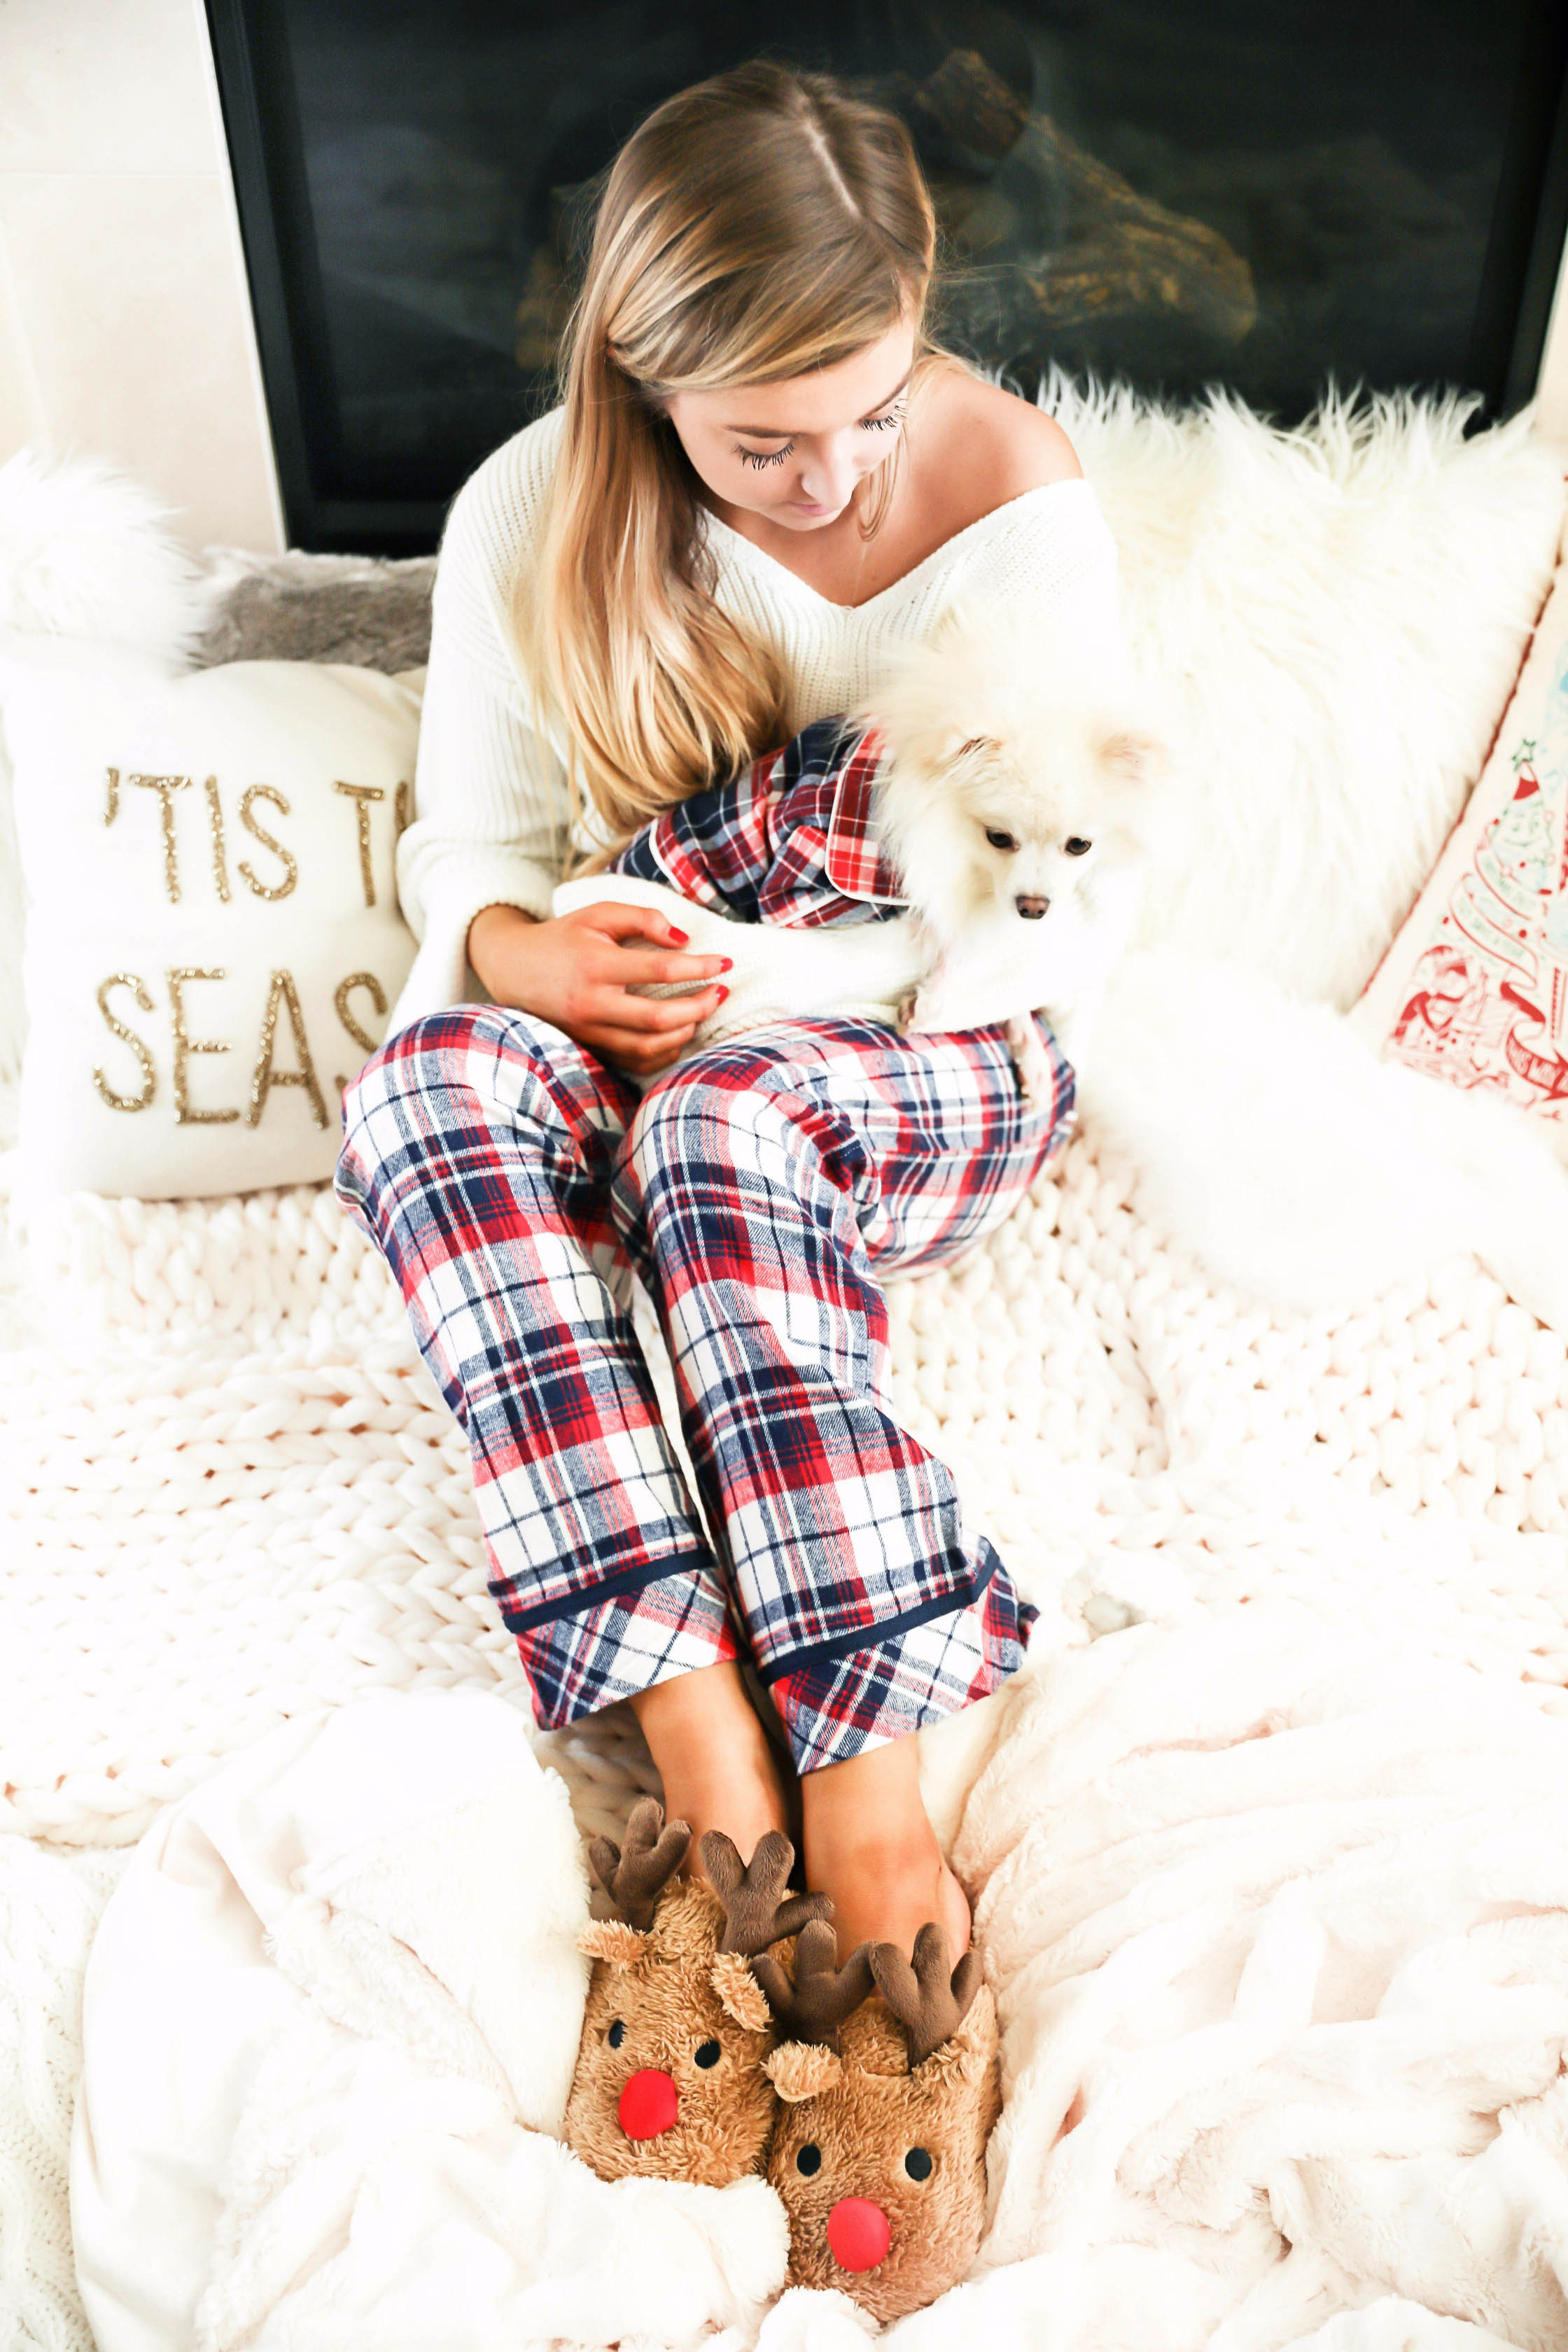 Matching pajamas with dog! Cute plaid matching pajamas with my white pomeranian! The cutest Pomeranian christmas photos! Details on fashion blog daily dose of charm by lauren lindmark